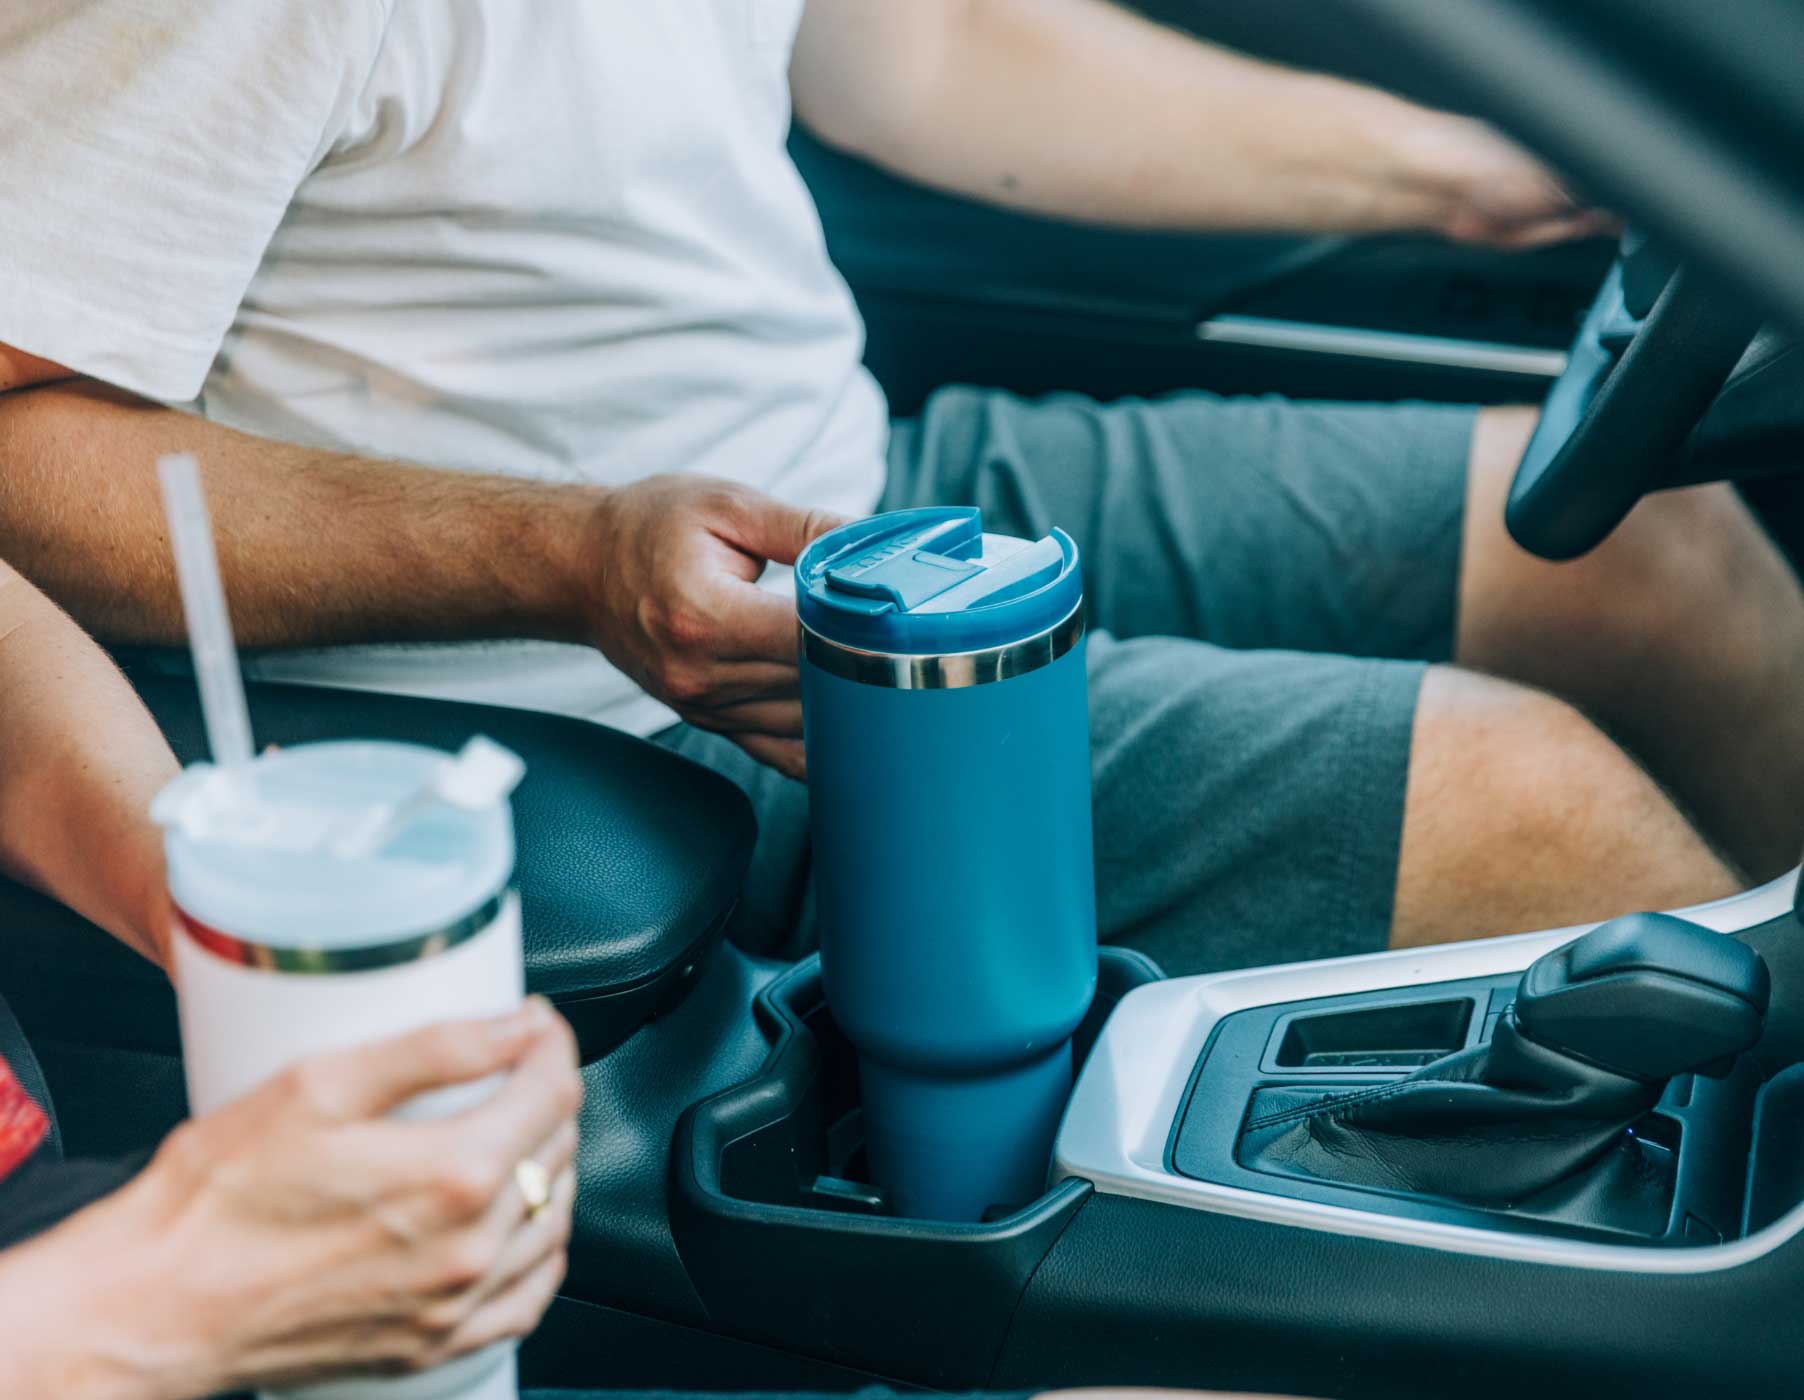  RTIC 40 oz Road Trip Tumbler Double-Walled Insulated Stainless  Steel Portable Travel Coffee Mug Cup with Lid, Handle and Straw, Sage: Home  & Kitchen